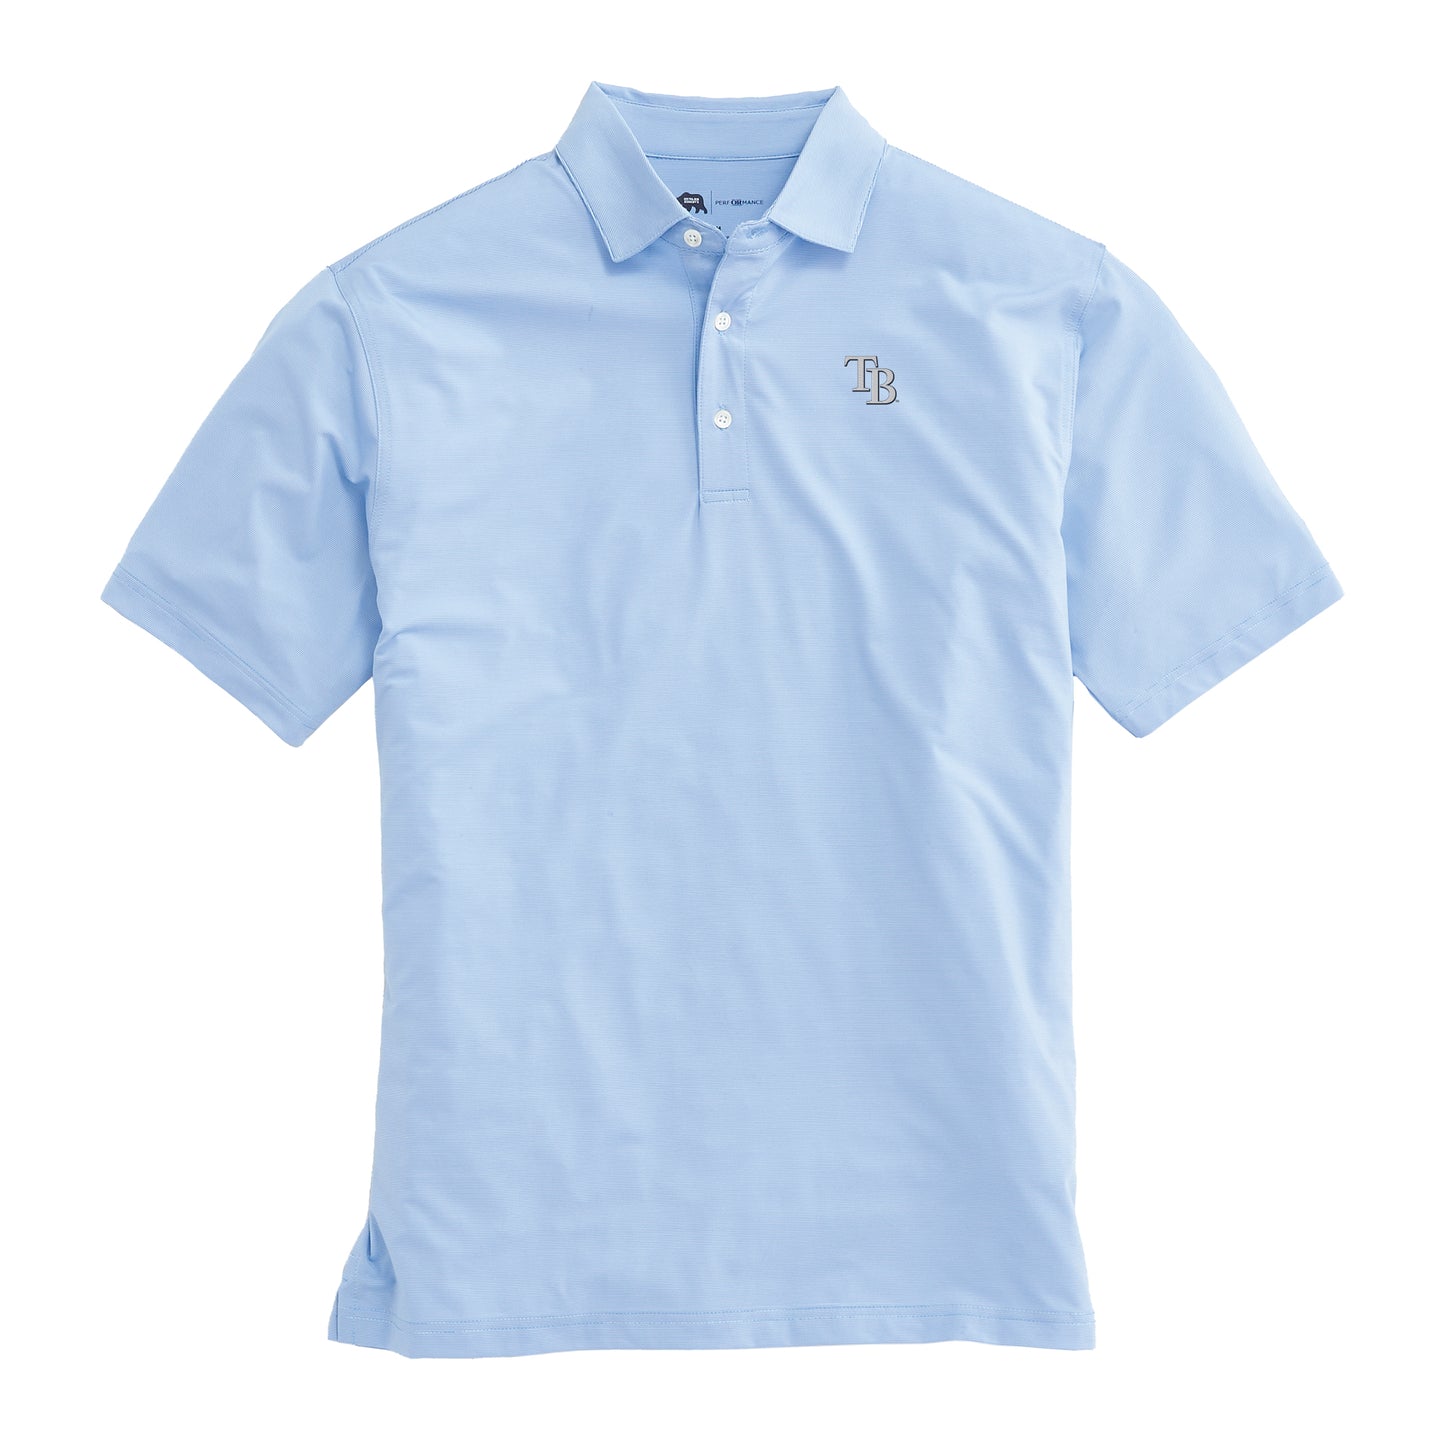 Tampa Bay Rays Hairline Stripe Performance Polo